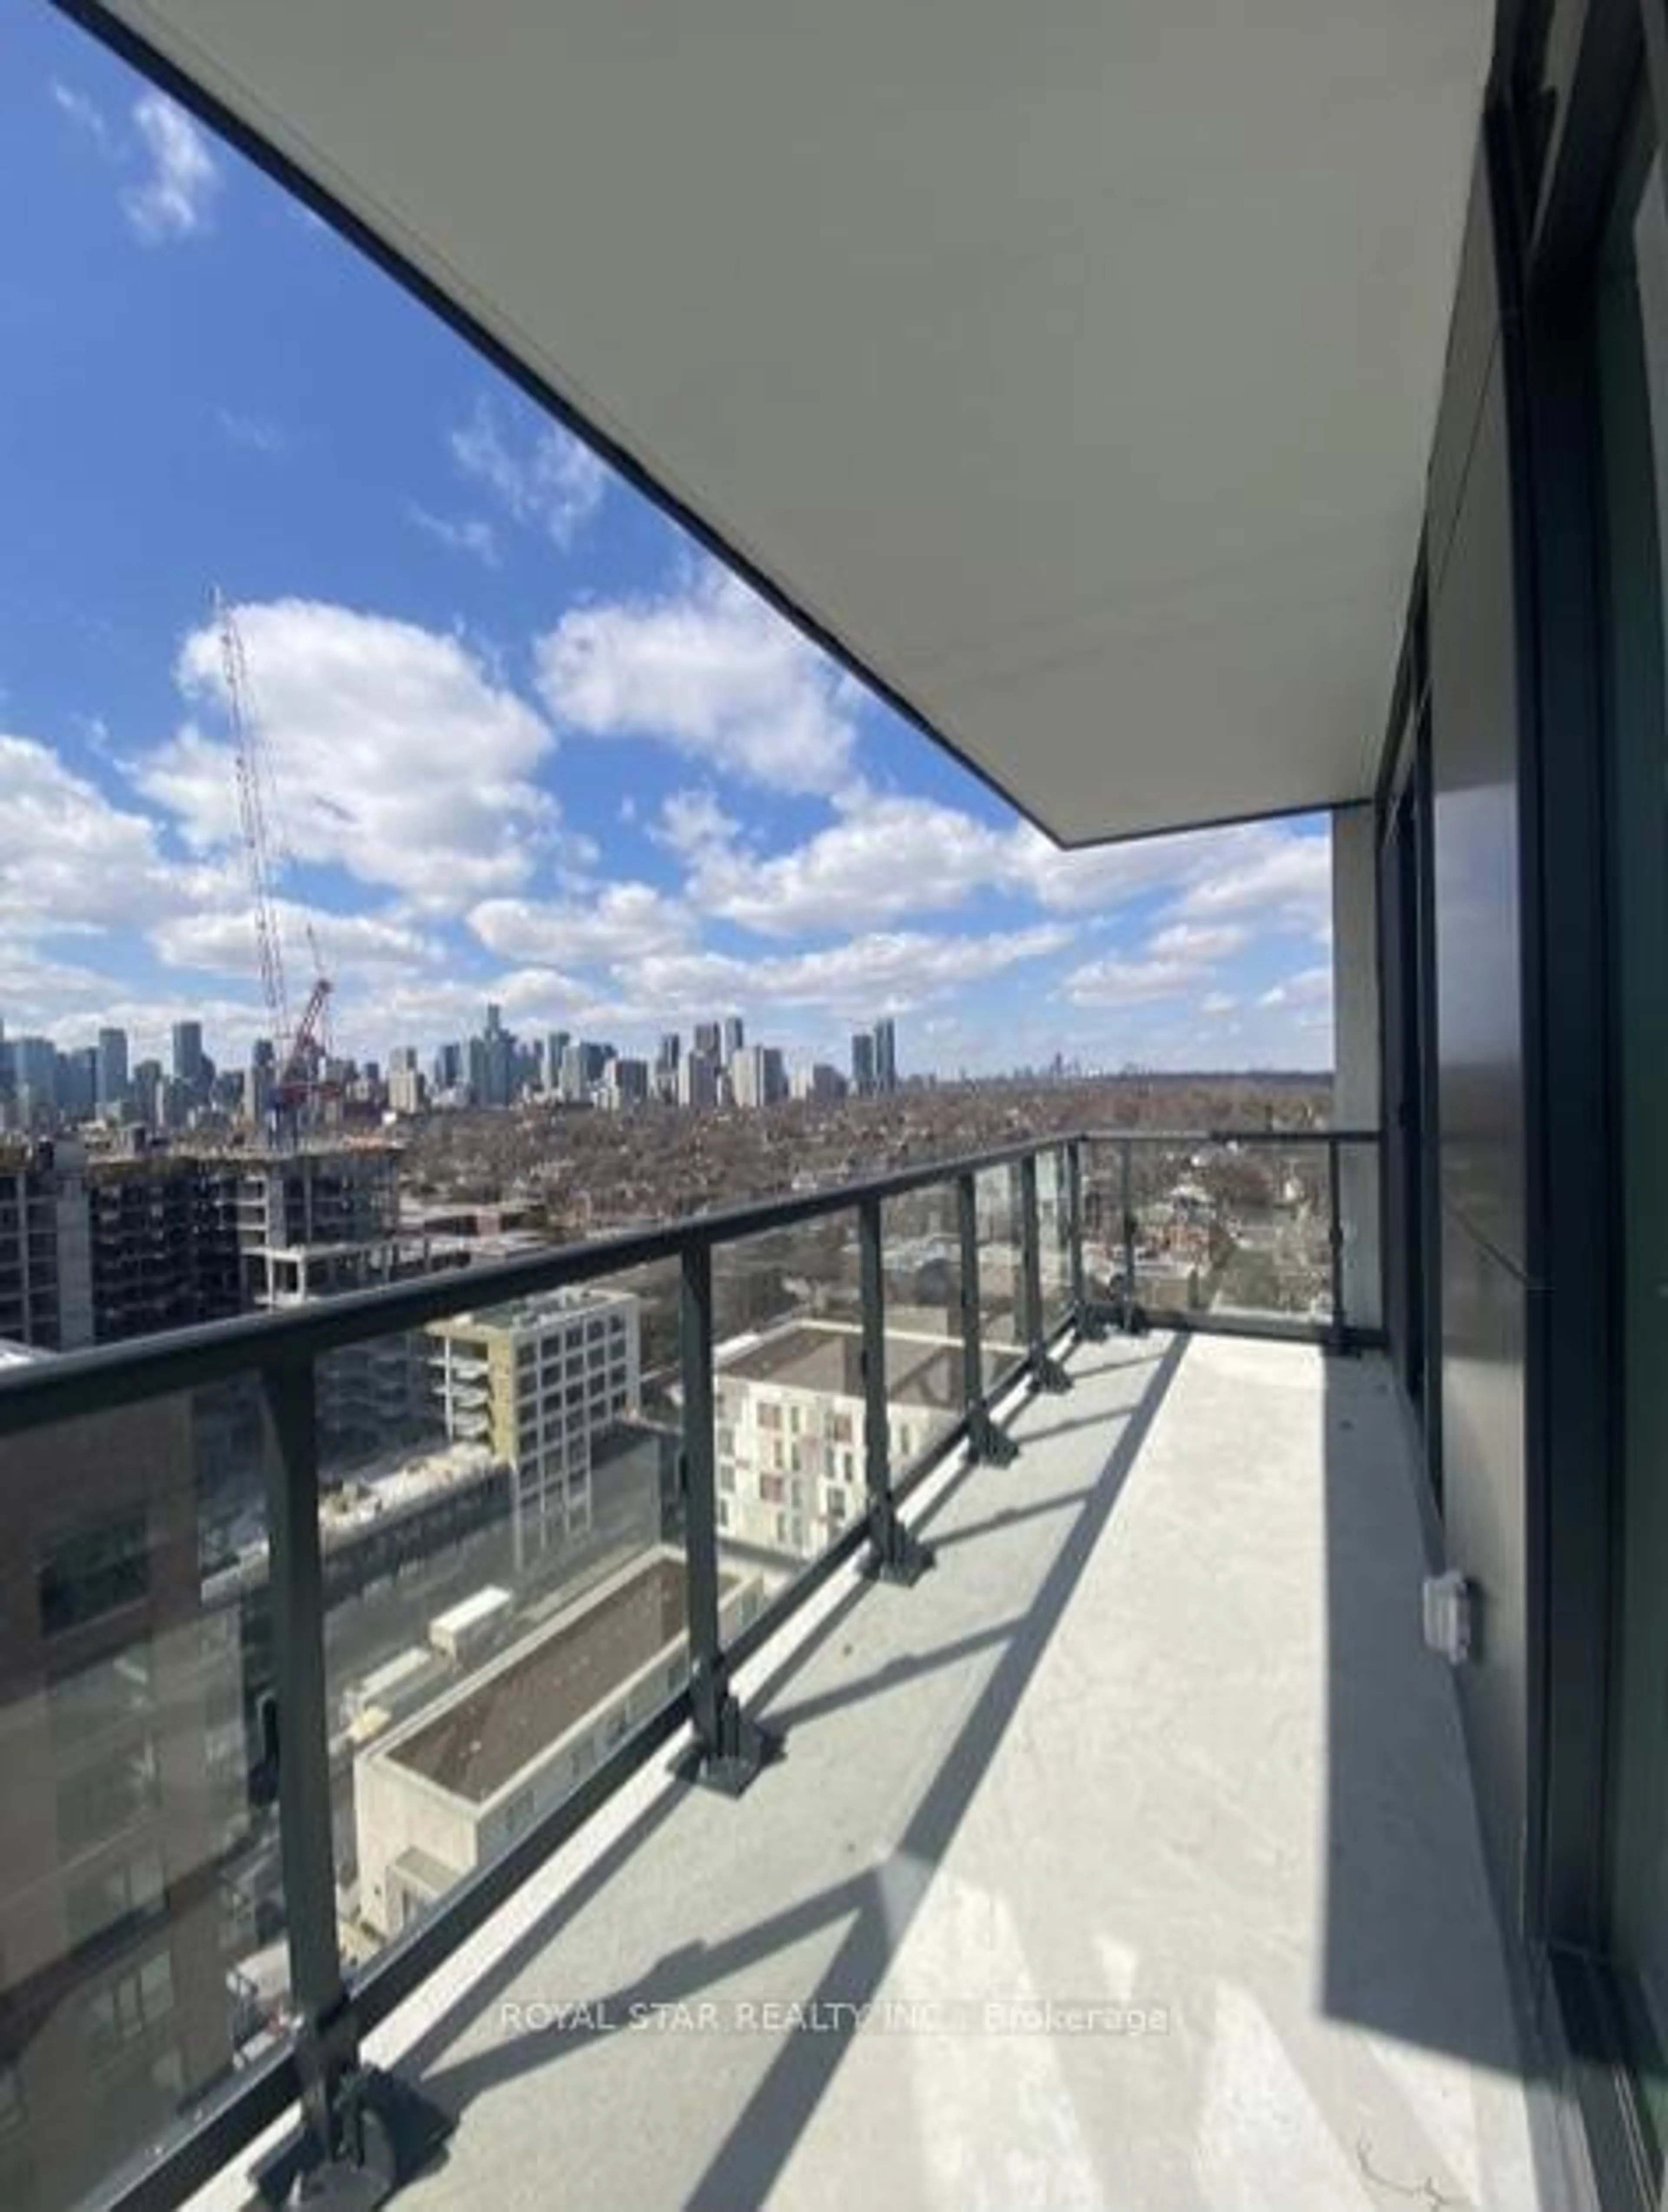 Balcony in the apartment for 130 River St #1508, Toronto Ontario M5V 3P7